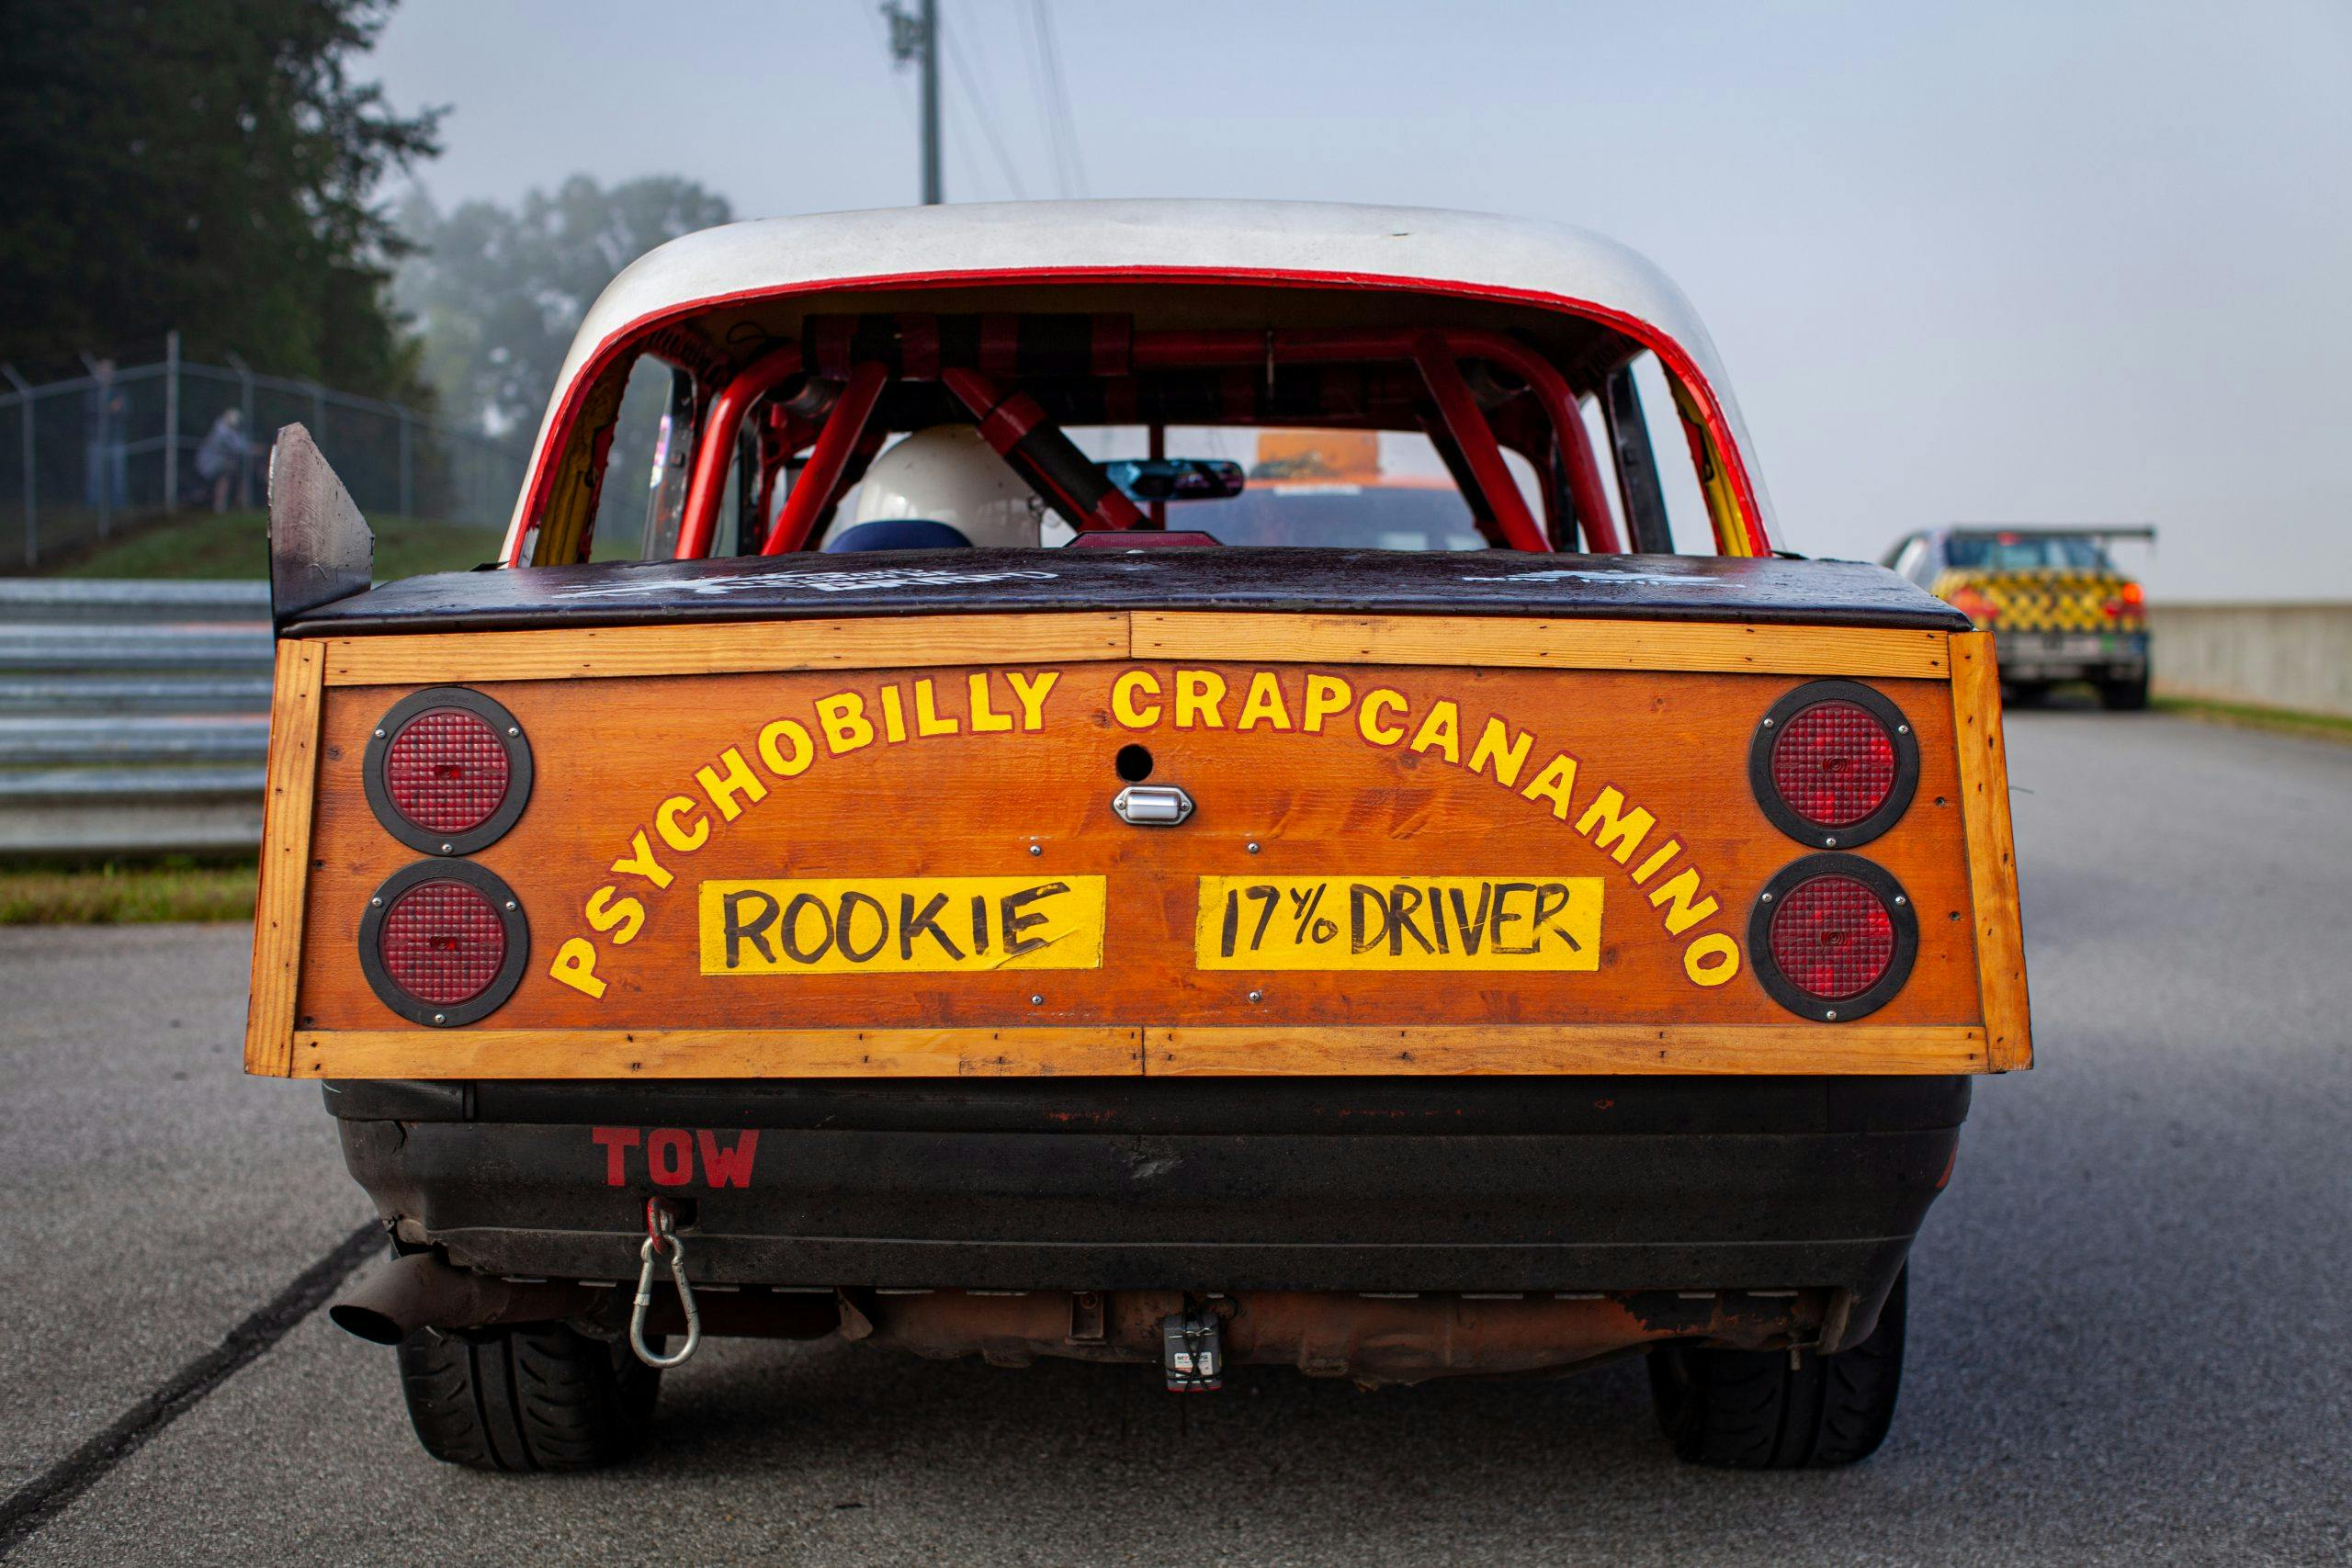 Car's tailgate reads "psychobilly crapcanamino rookie driver" at 24 Hours of Lemons